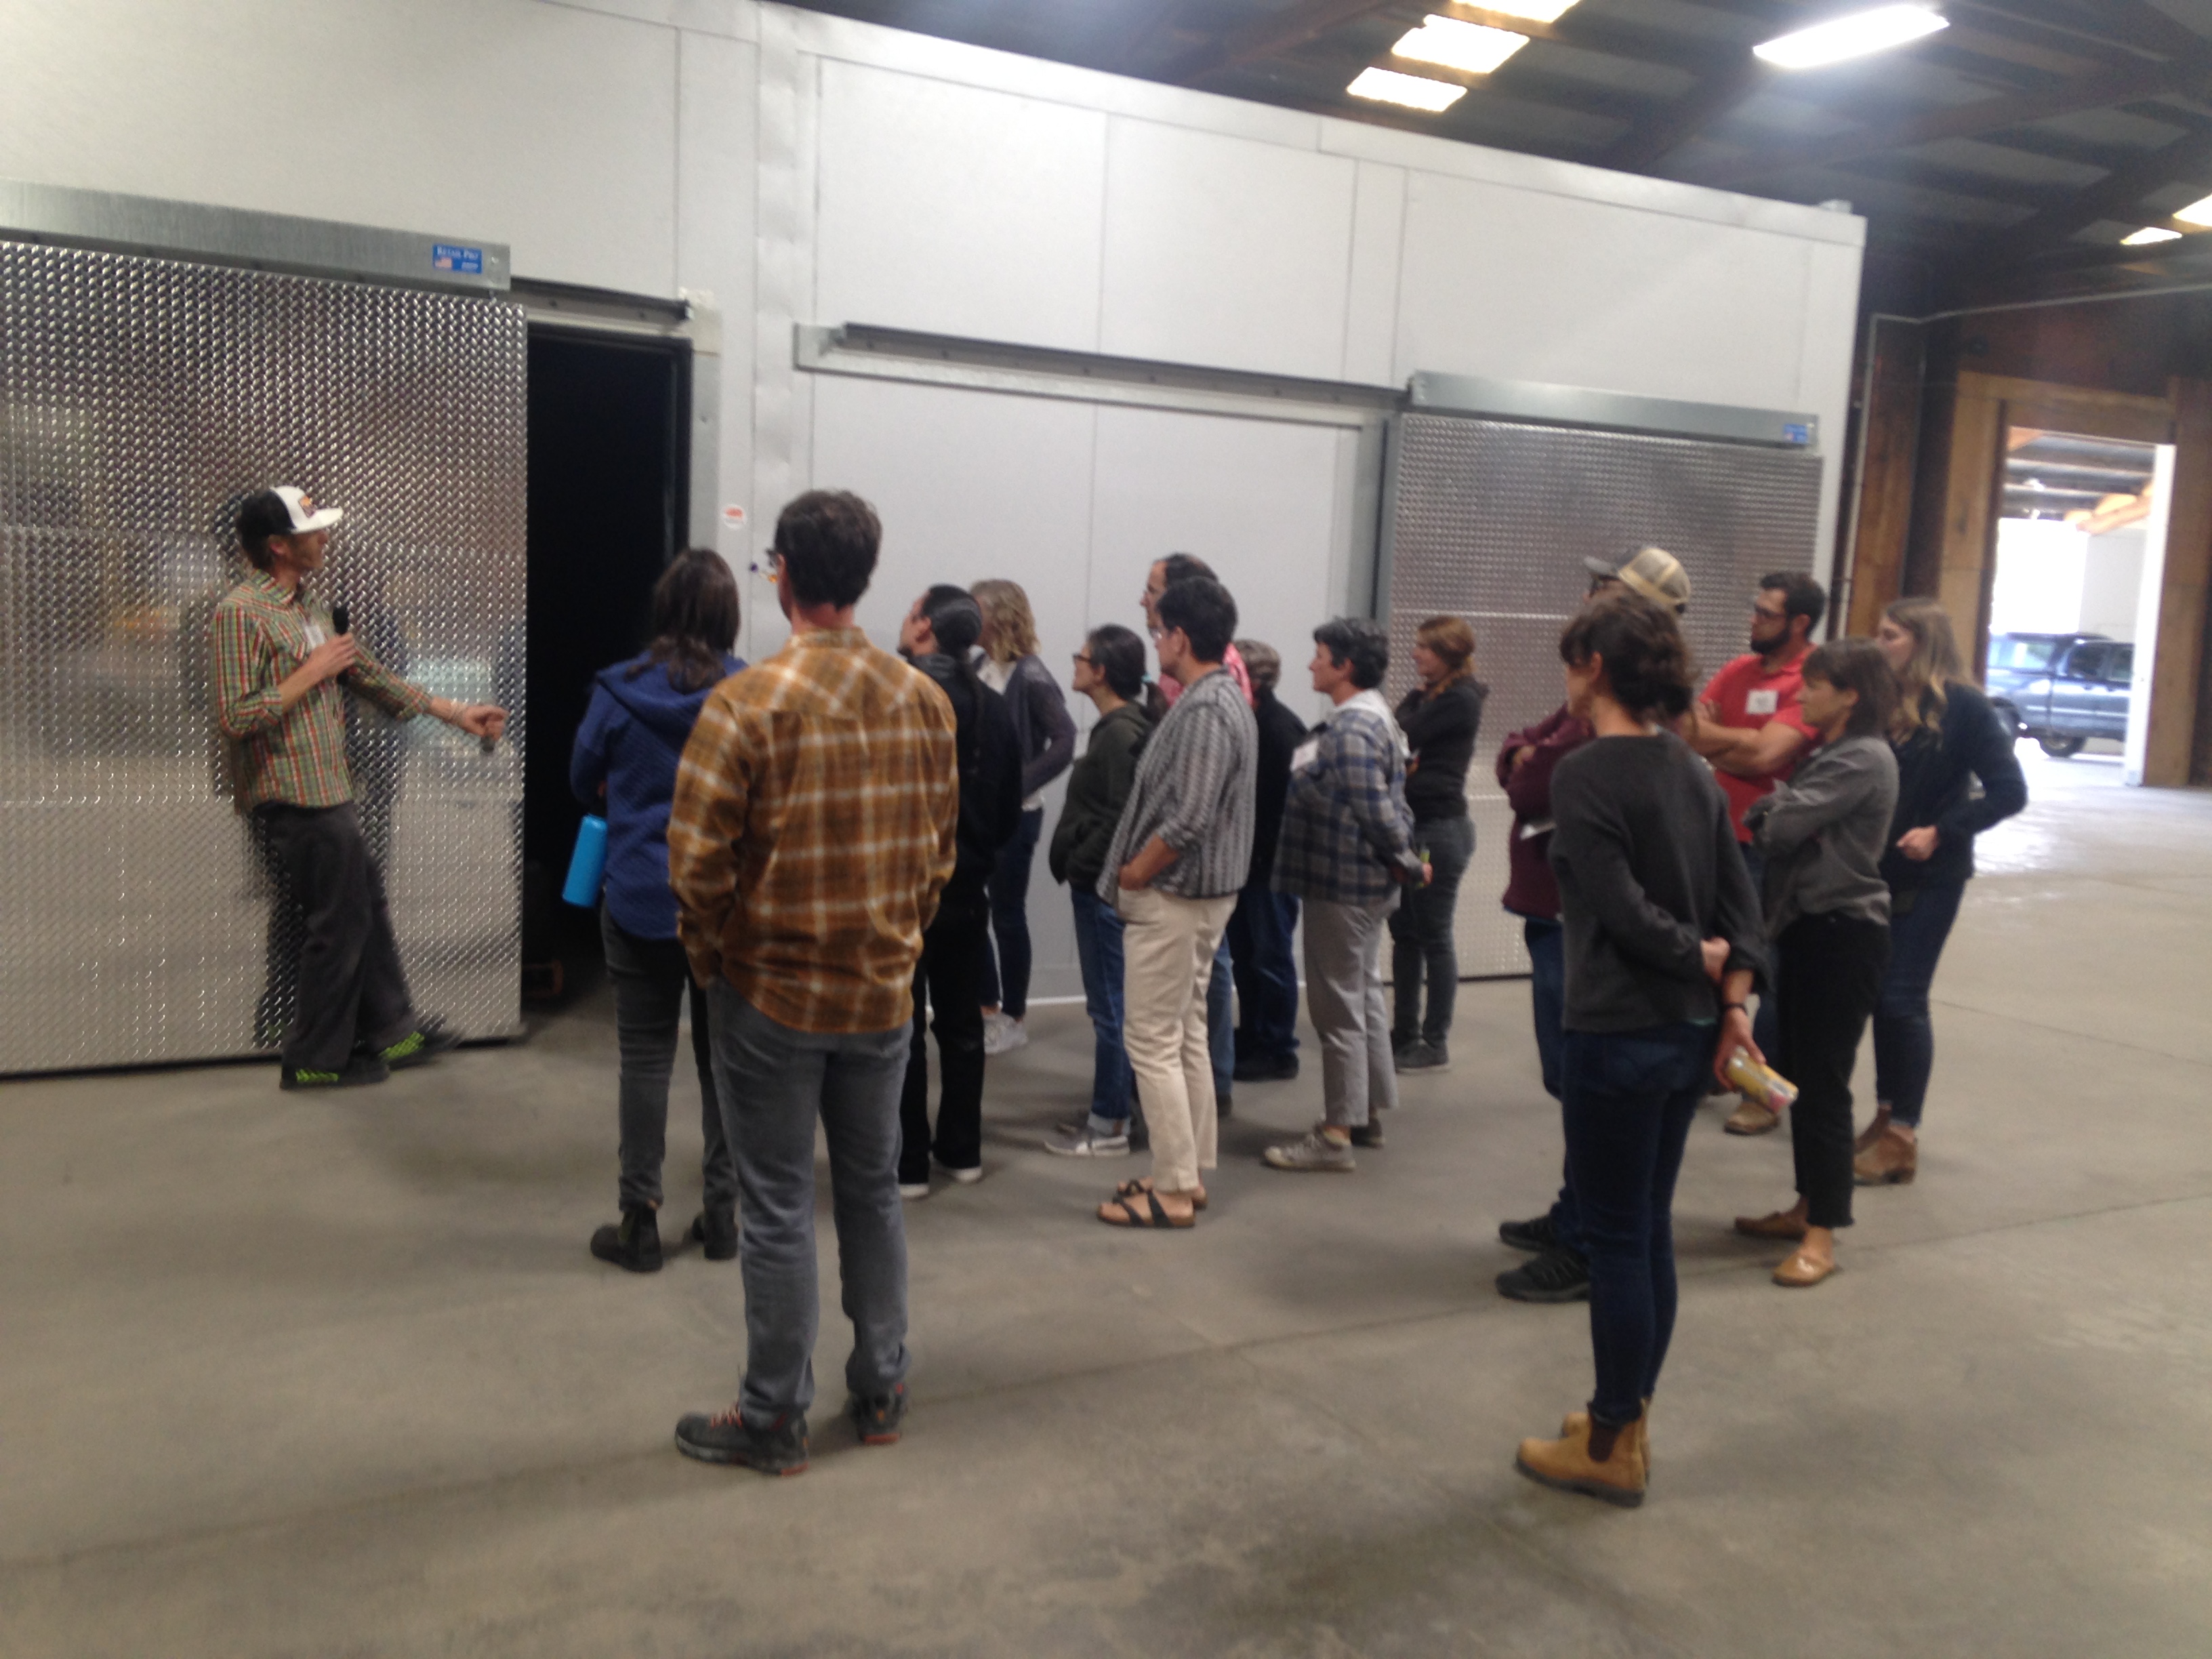 A man gives a tour of a food hub facility to a small group